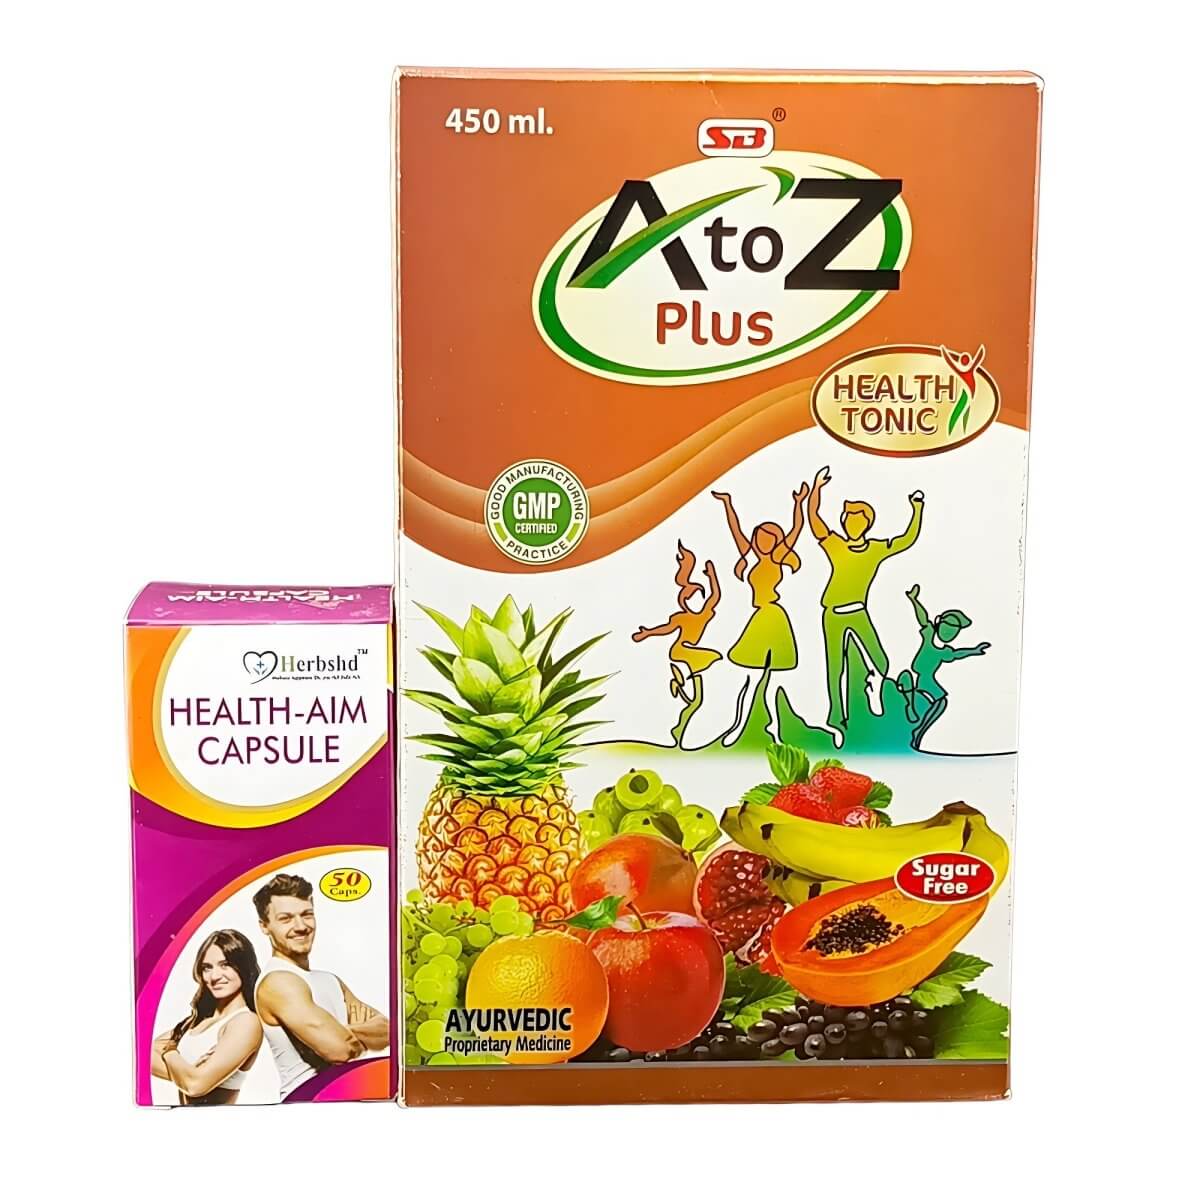 A to Z Plus Tonic & Health - Aim Capsule (Combo Pack)